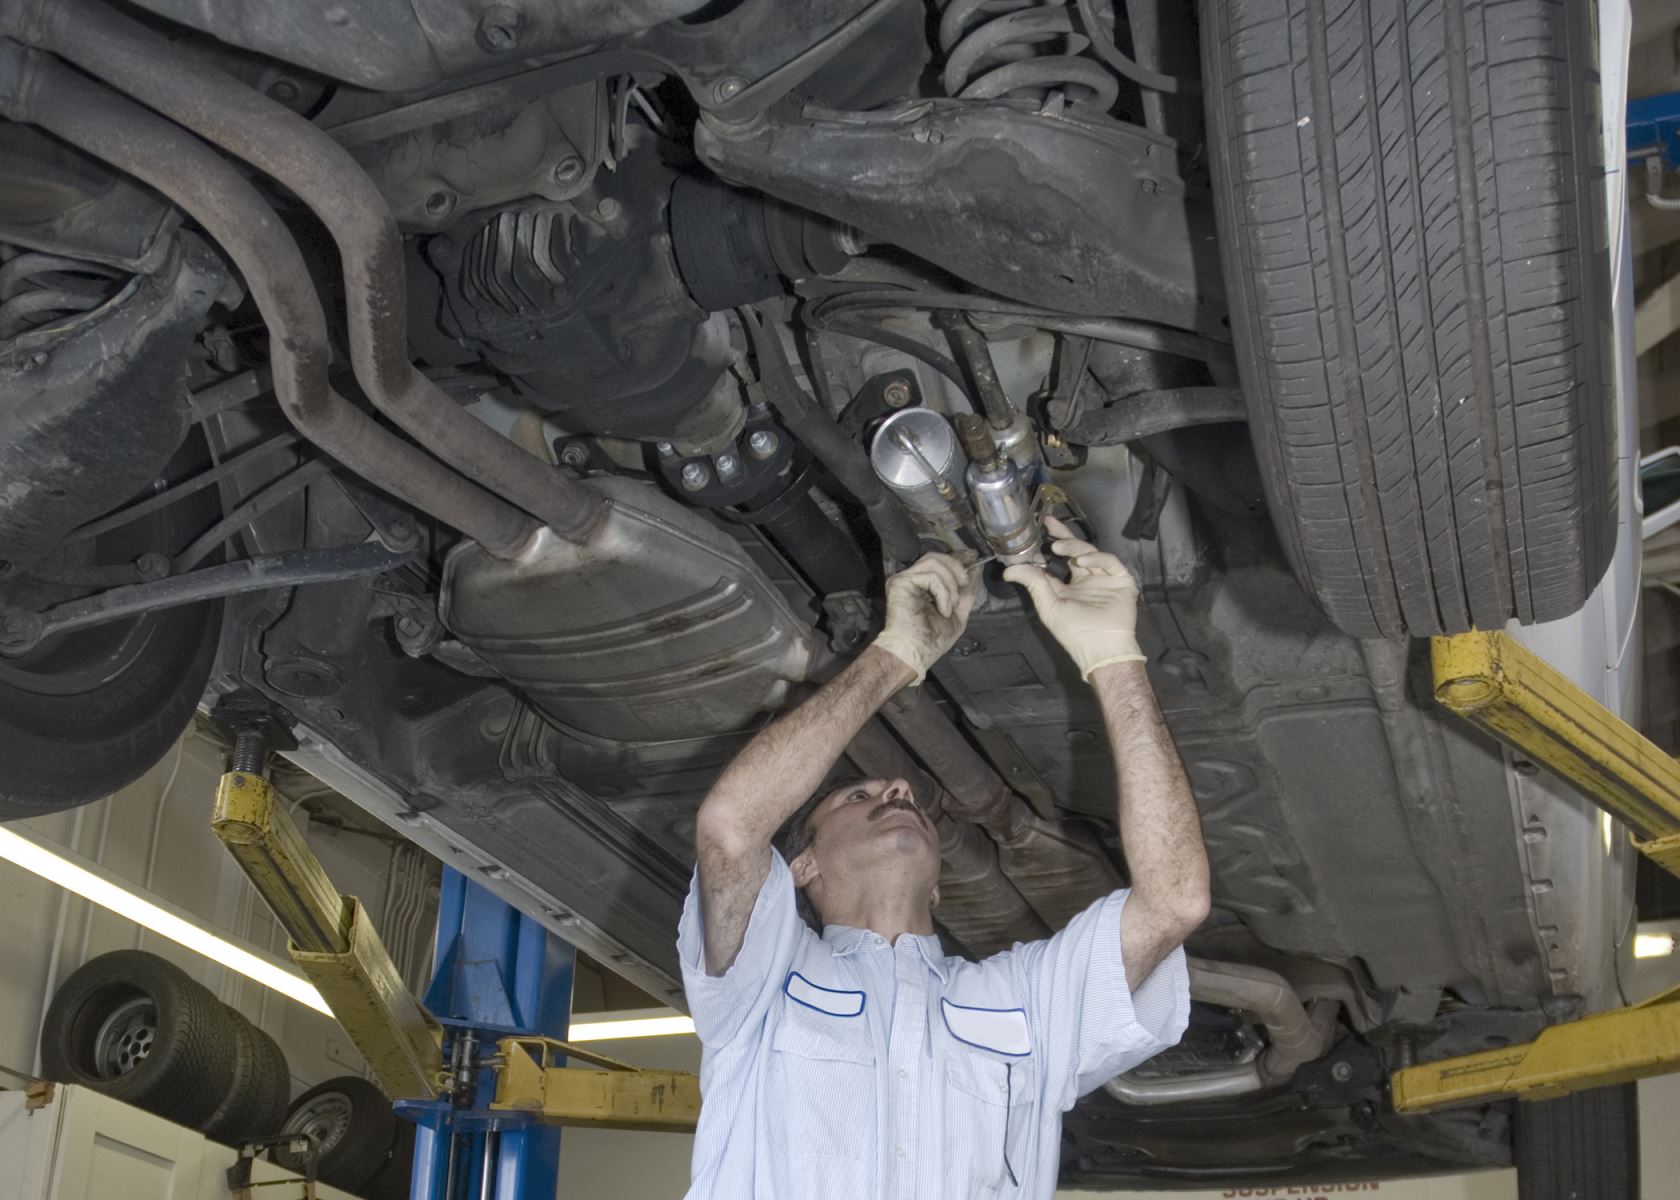 Customer Gets Oil Change and Free Vehicle Inspection at Fox Run Auto